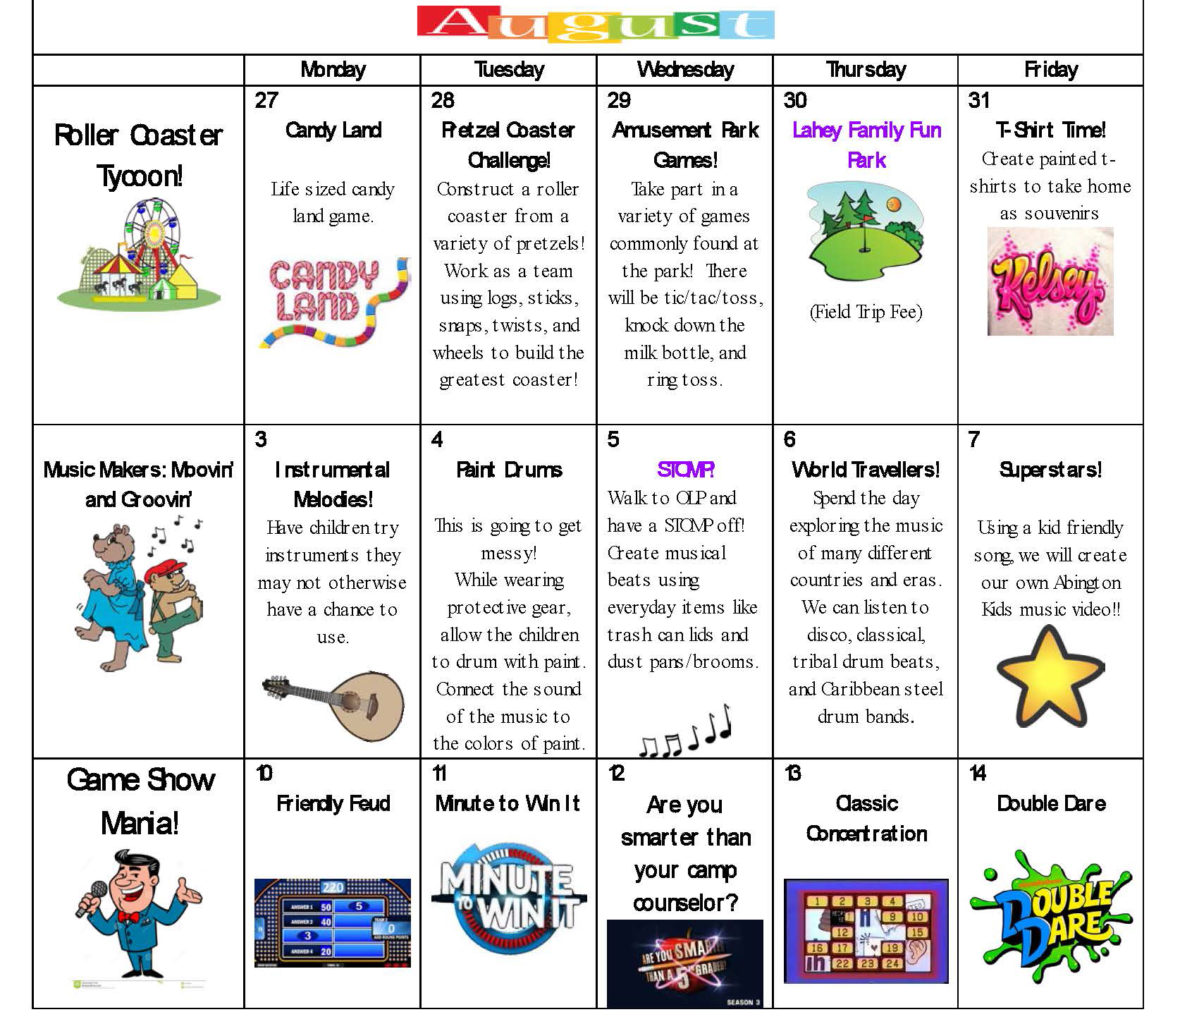 SUMMER CAMP SCHEDULE Kids Creative Learning Centers